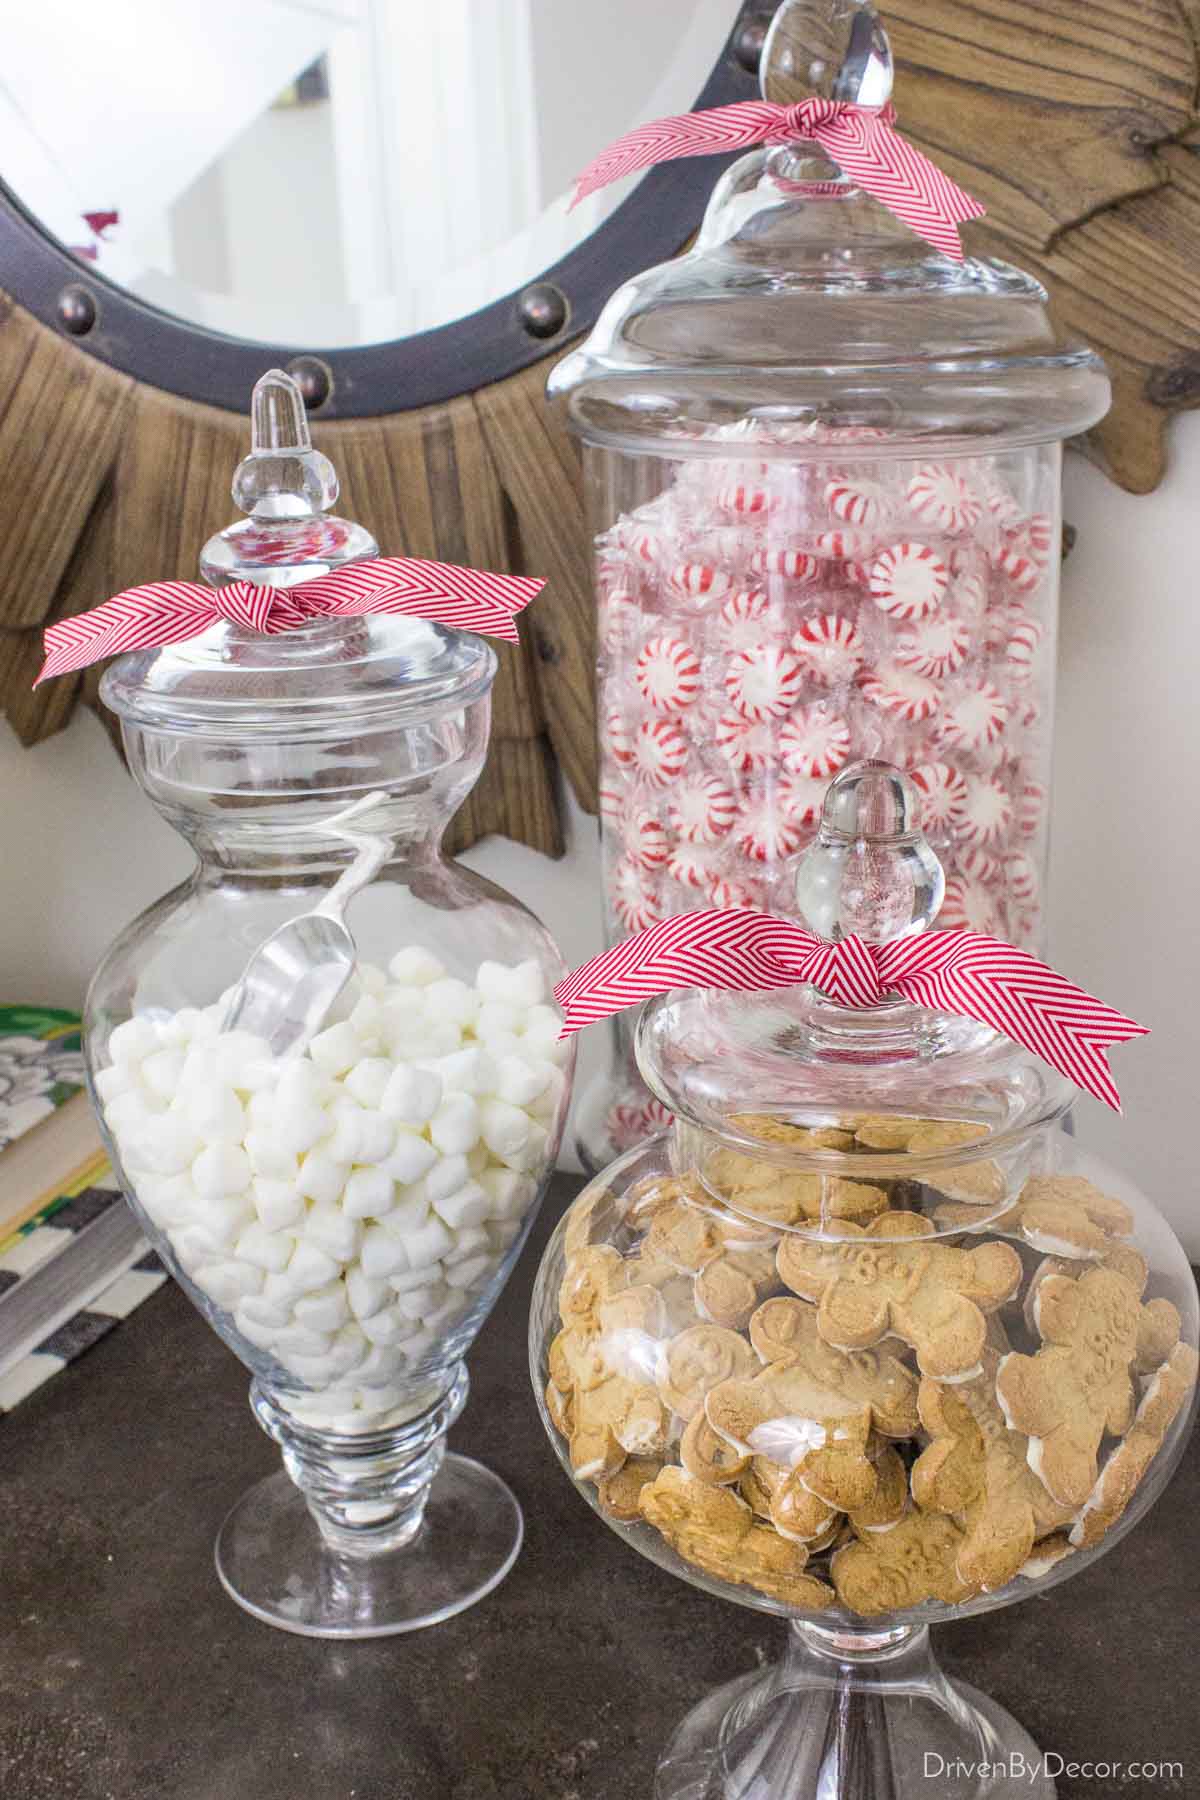 Fill apothecary jars with sweet Christmas treats for simple holiday decorations!